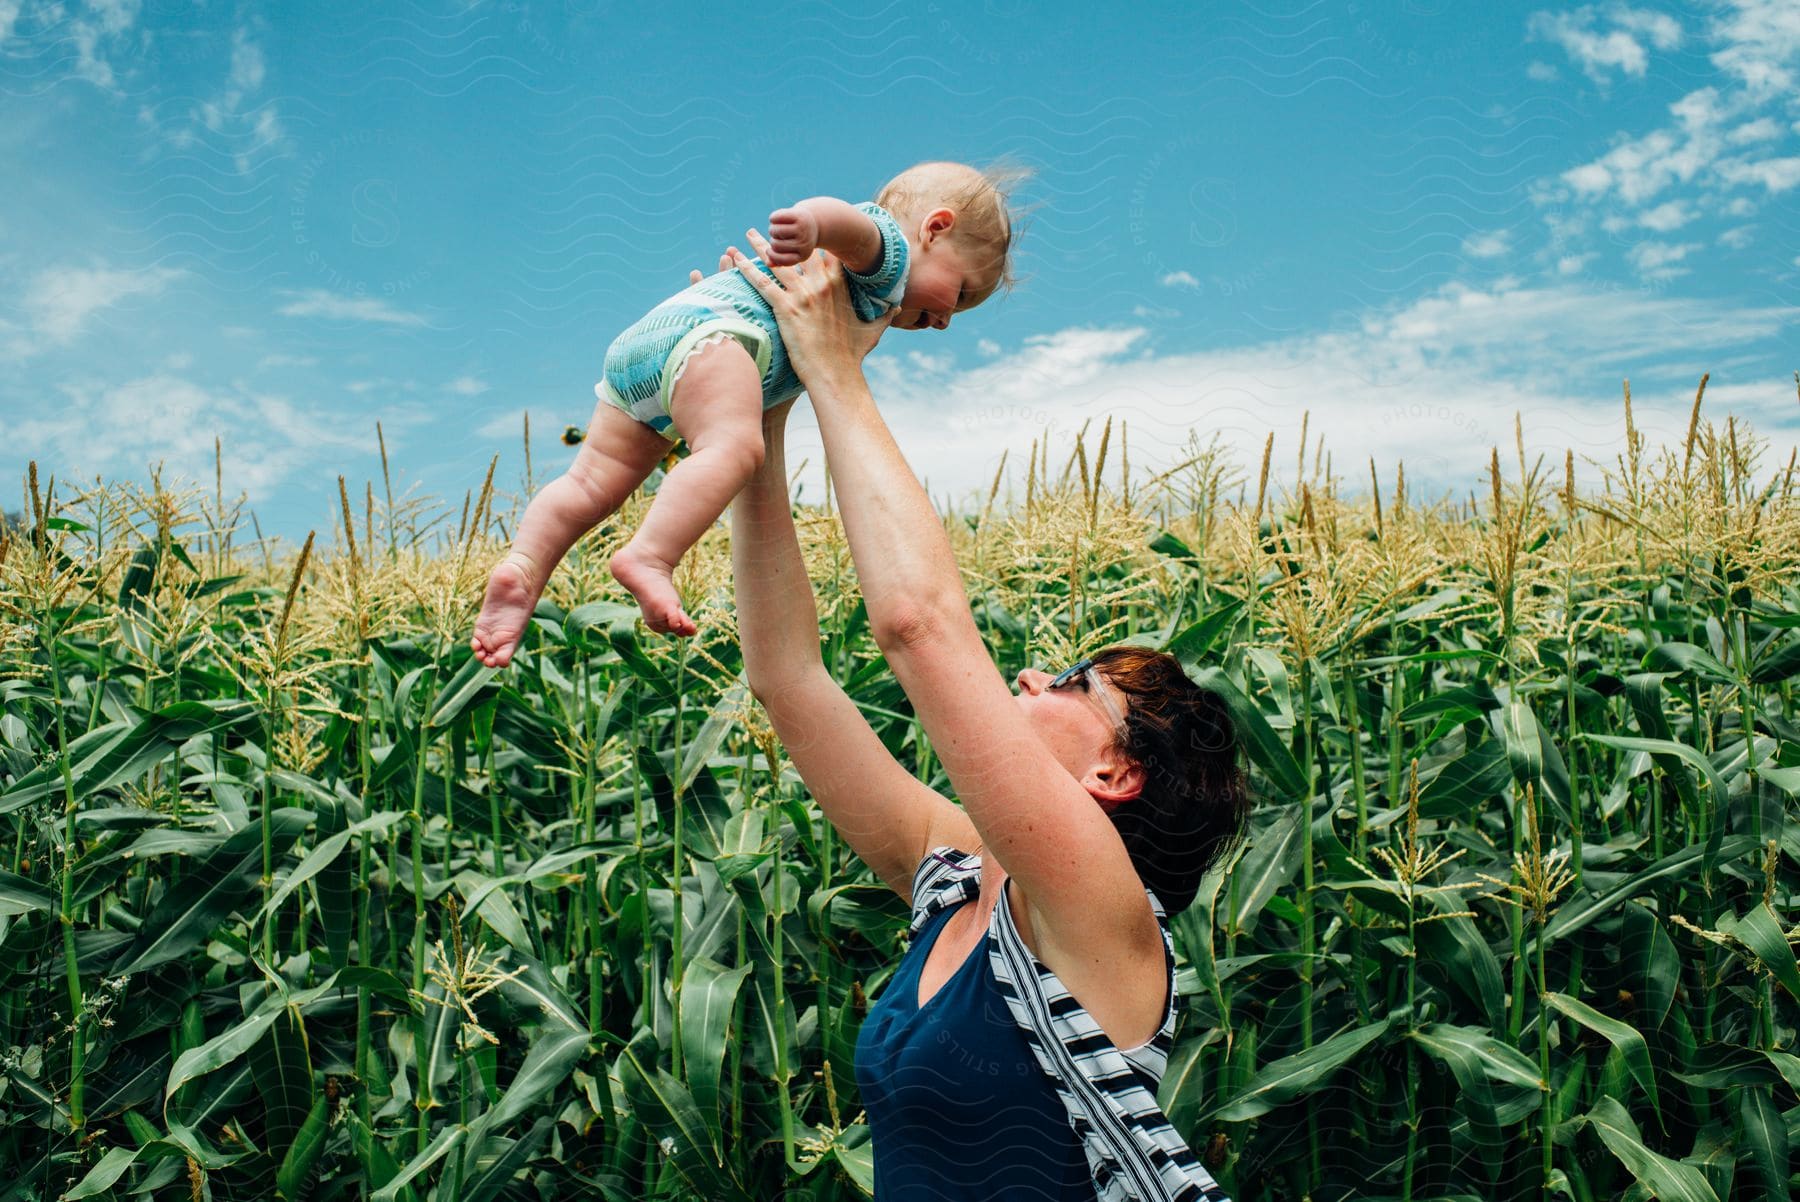 Mother with sunglasses and a blue blouse throws her baby up in the air in the corn field